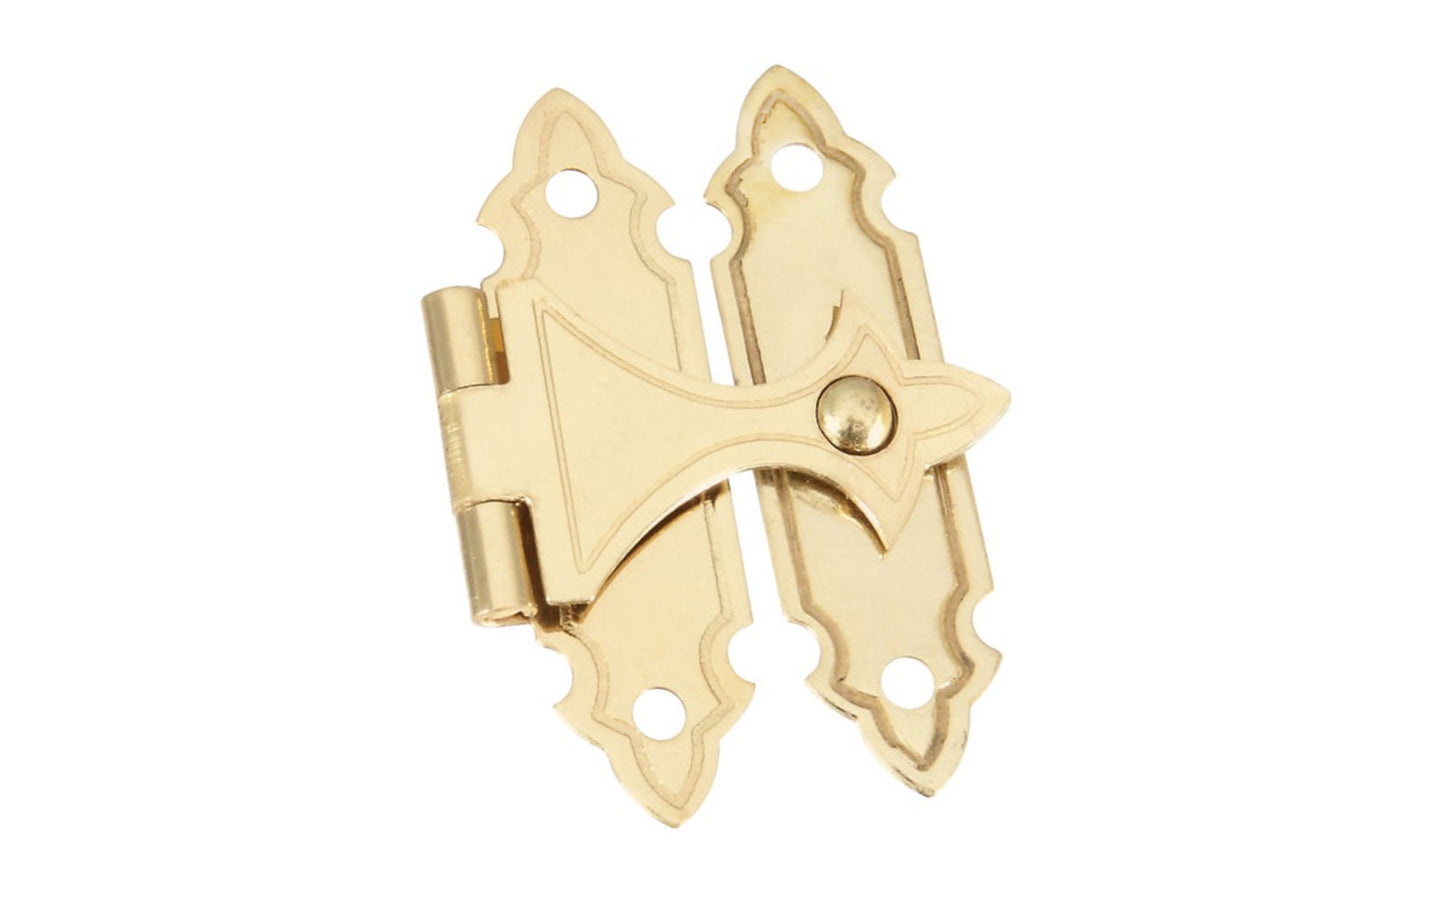 These small solid brass decorative hasps are designed to add a decorative appearance to small chests, jewelry boxes, craft projects, etc. Sold as two catches in pack. National Hardware Model N211-946. 038613211940